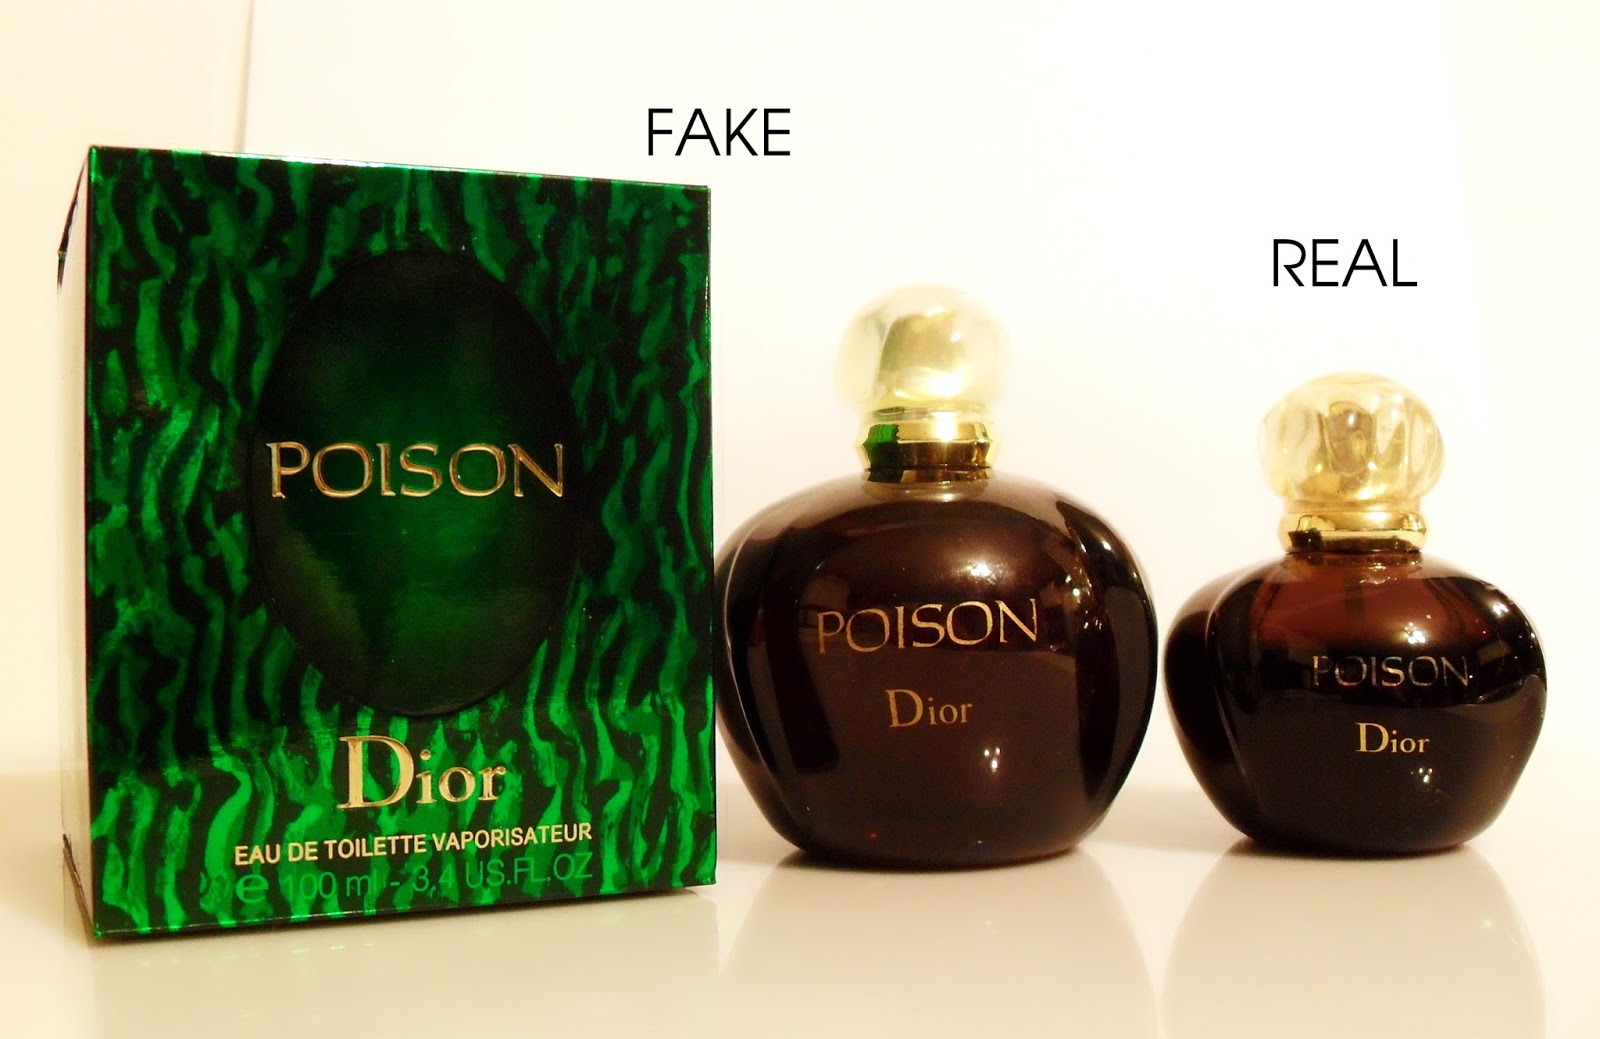 Pure Poison by Dior » Reviews & Perfume Facts